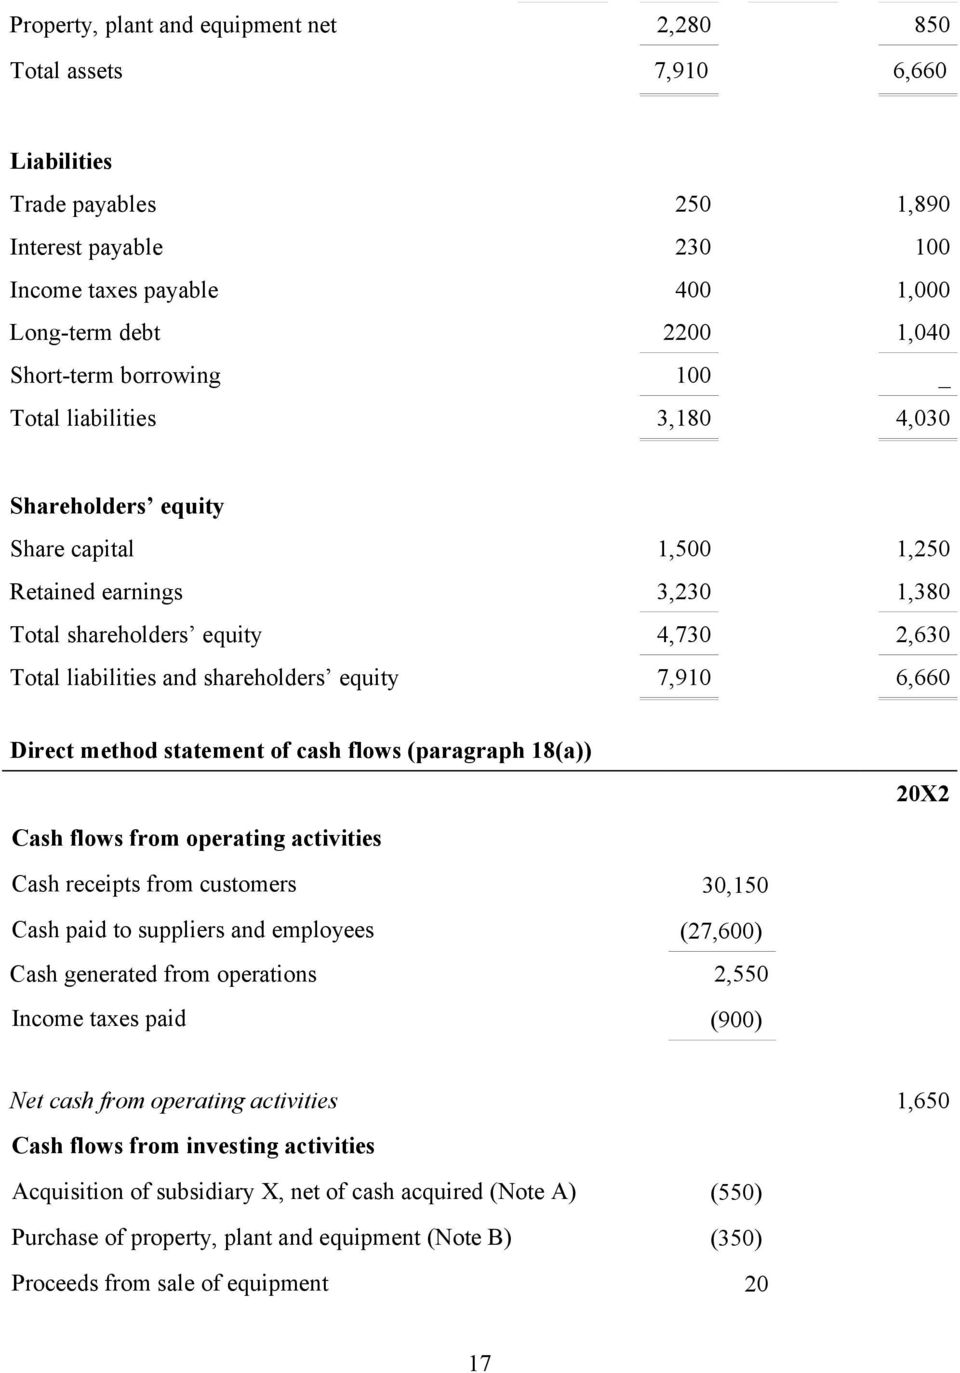 equity 7,910 6,660 Direct method statement of cash flows (paragraph 18) 20X2 Cash flows from operating activities Cash receipts from customers 30,150 Cash paid to suppliers and employees (27,600)